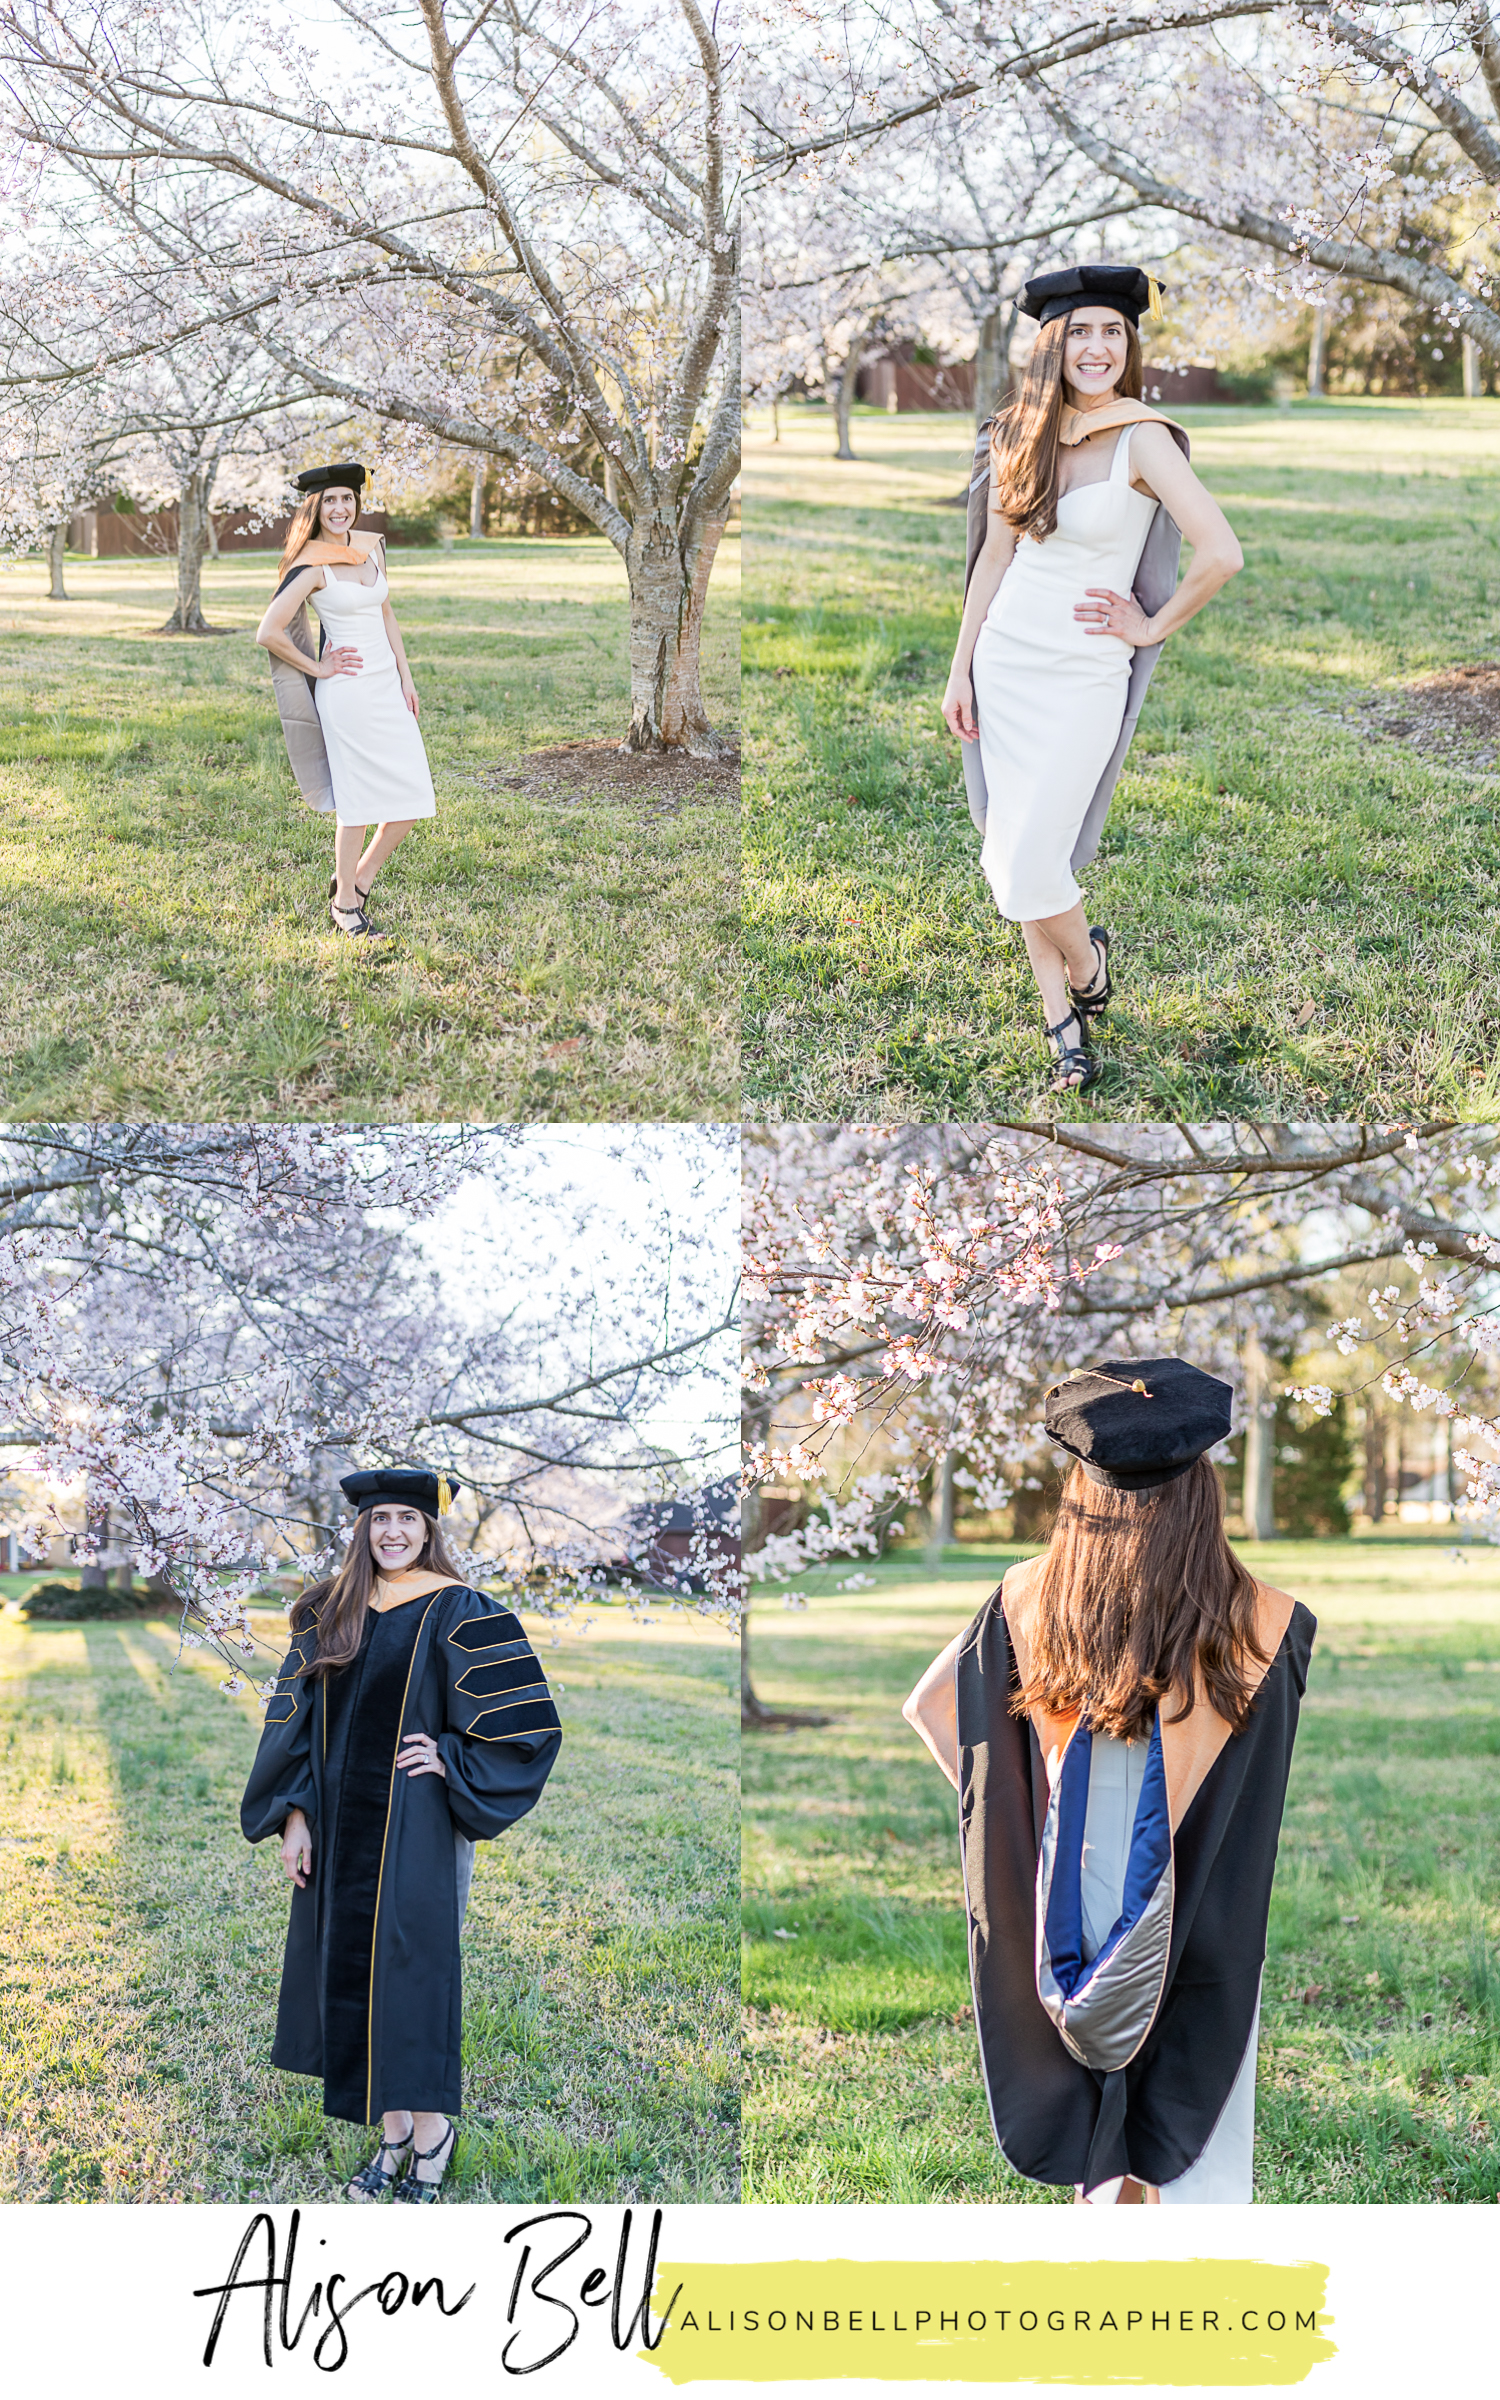 Spring senior cap and gown photo session with cherry blossoms in virginia beach, va by alisonbell photographer